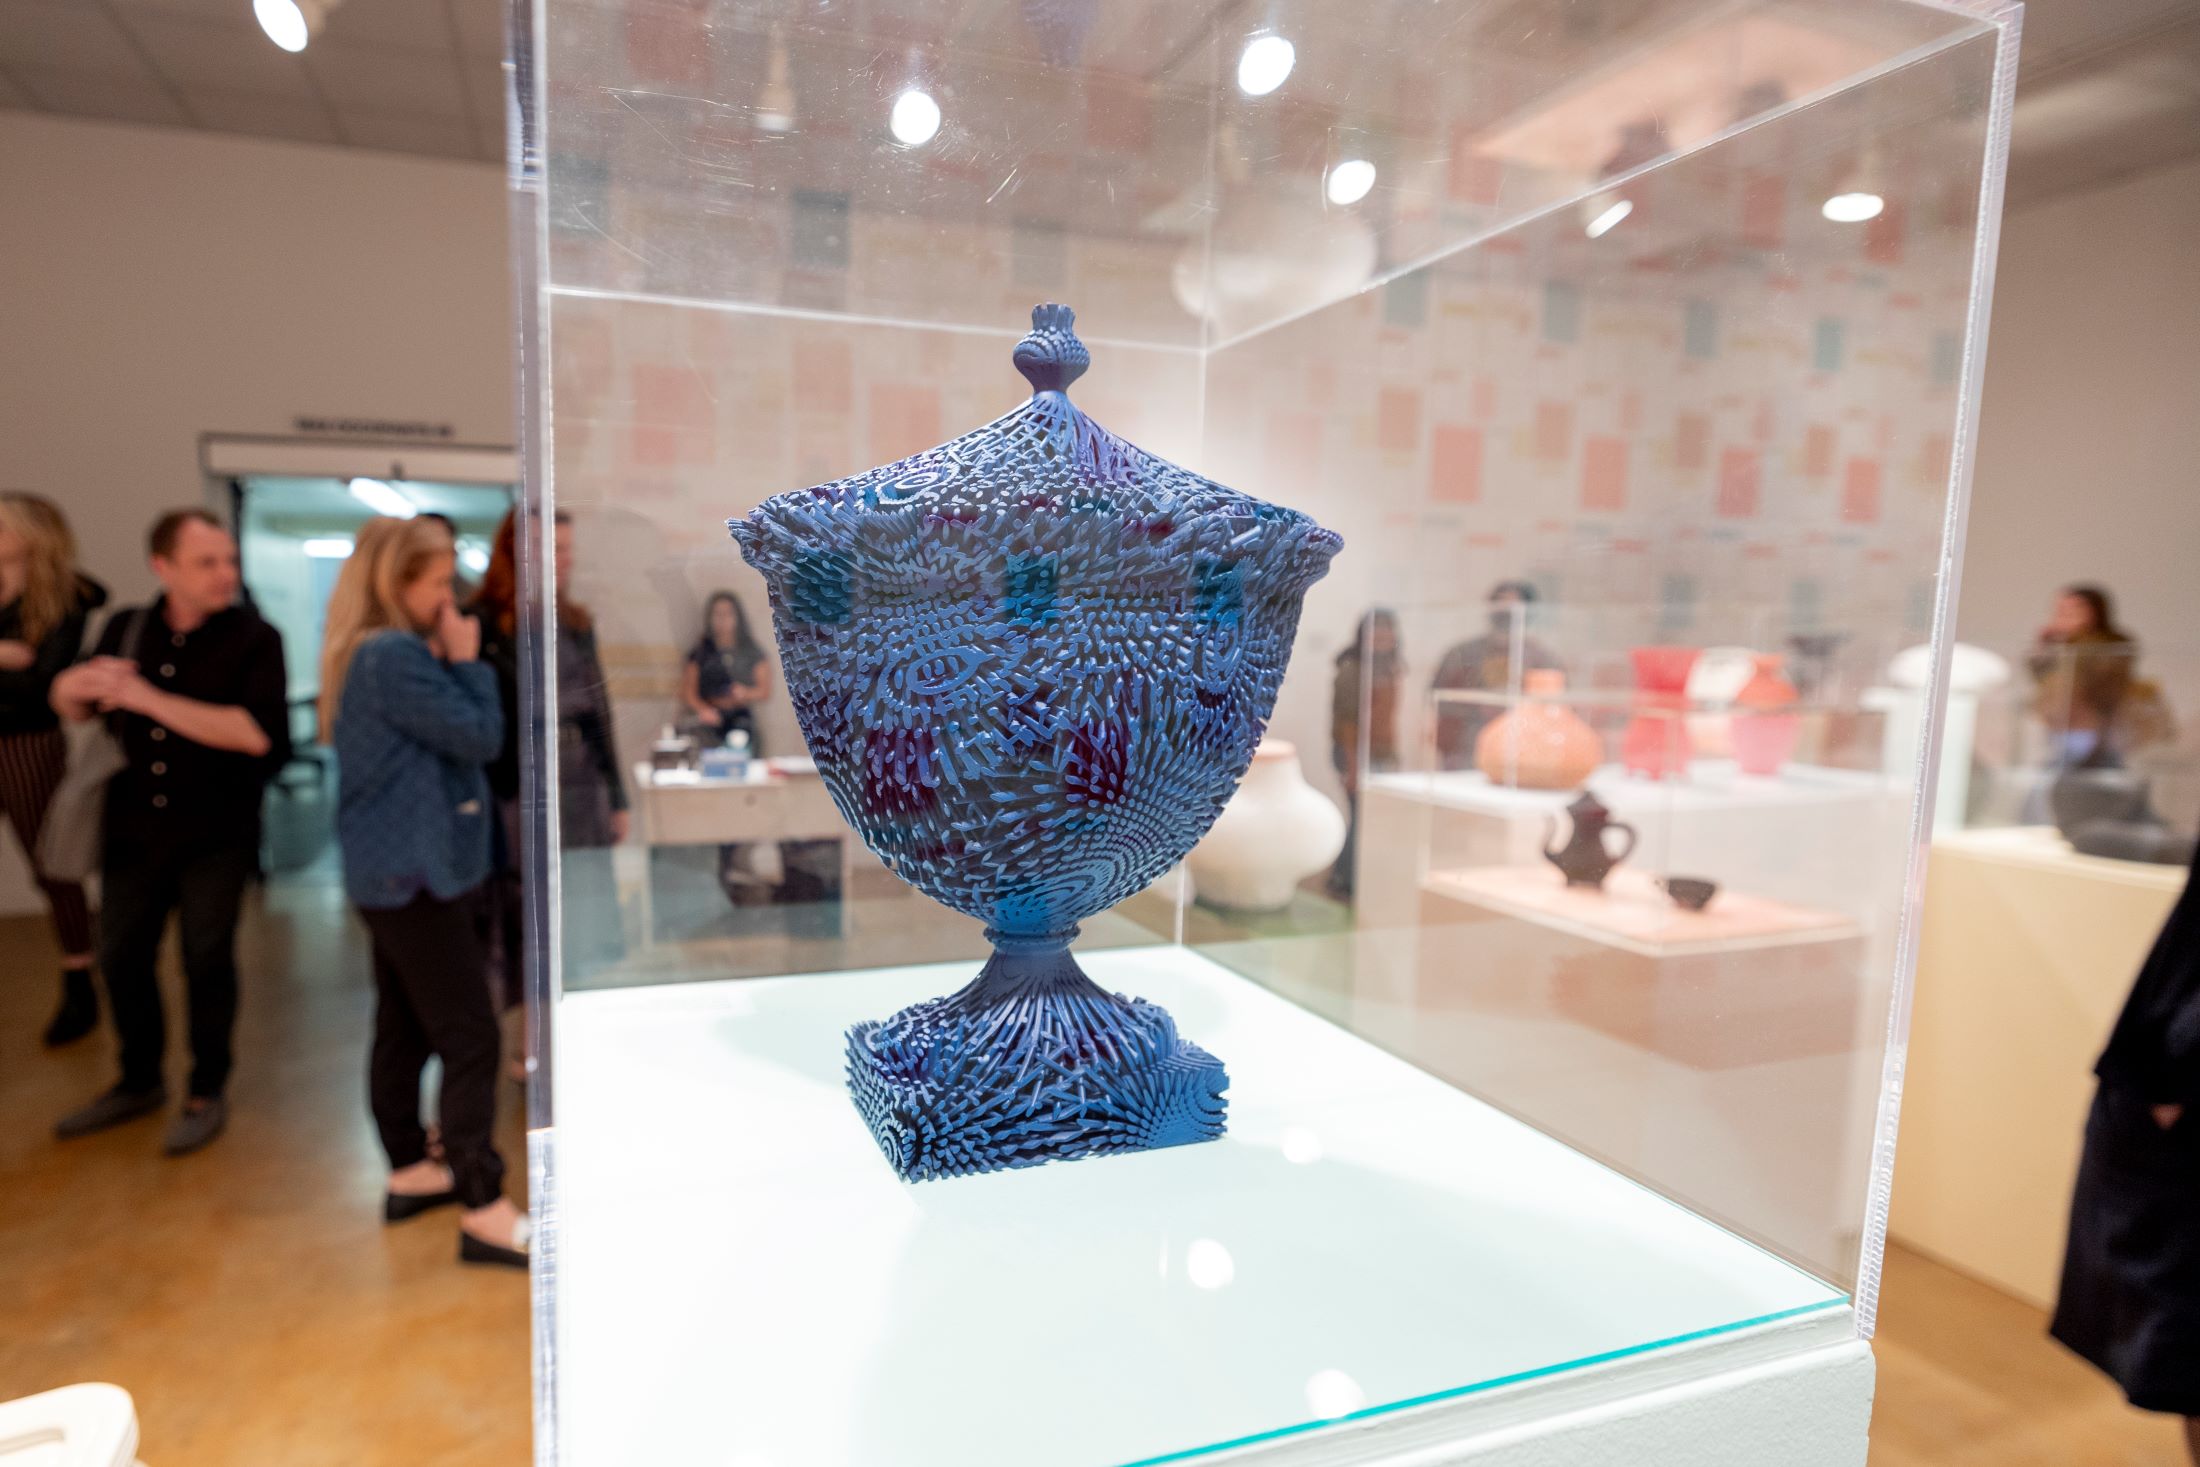 Artwork by Michael Eden, Curved Blue Bloom (2015). Courtesy of Adrian Sassoon Gallery. Photo by Galen Ducey.